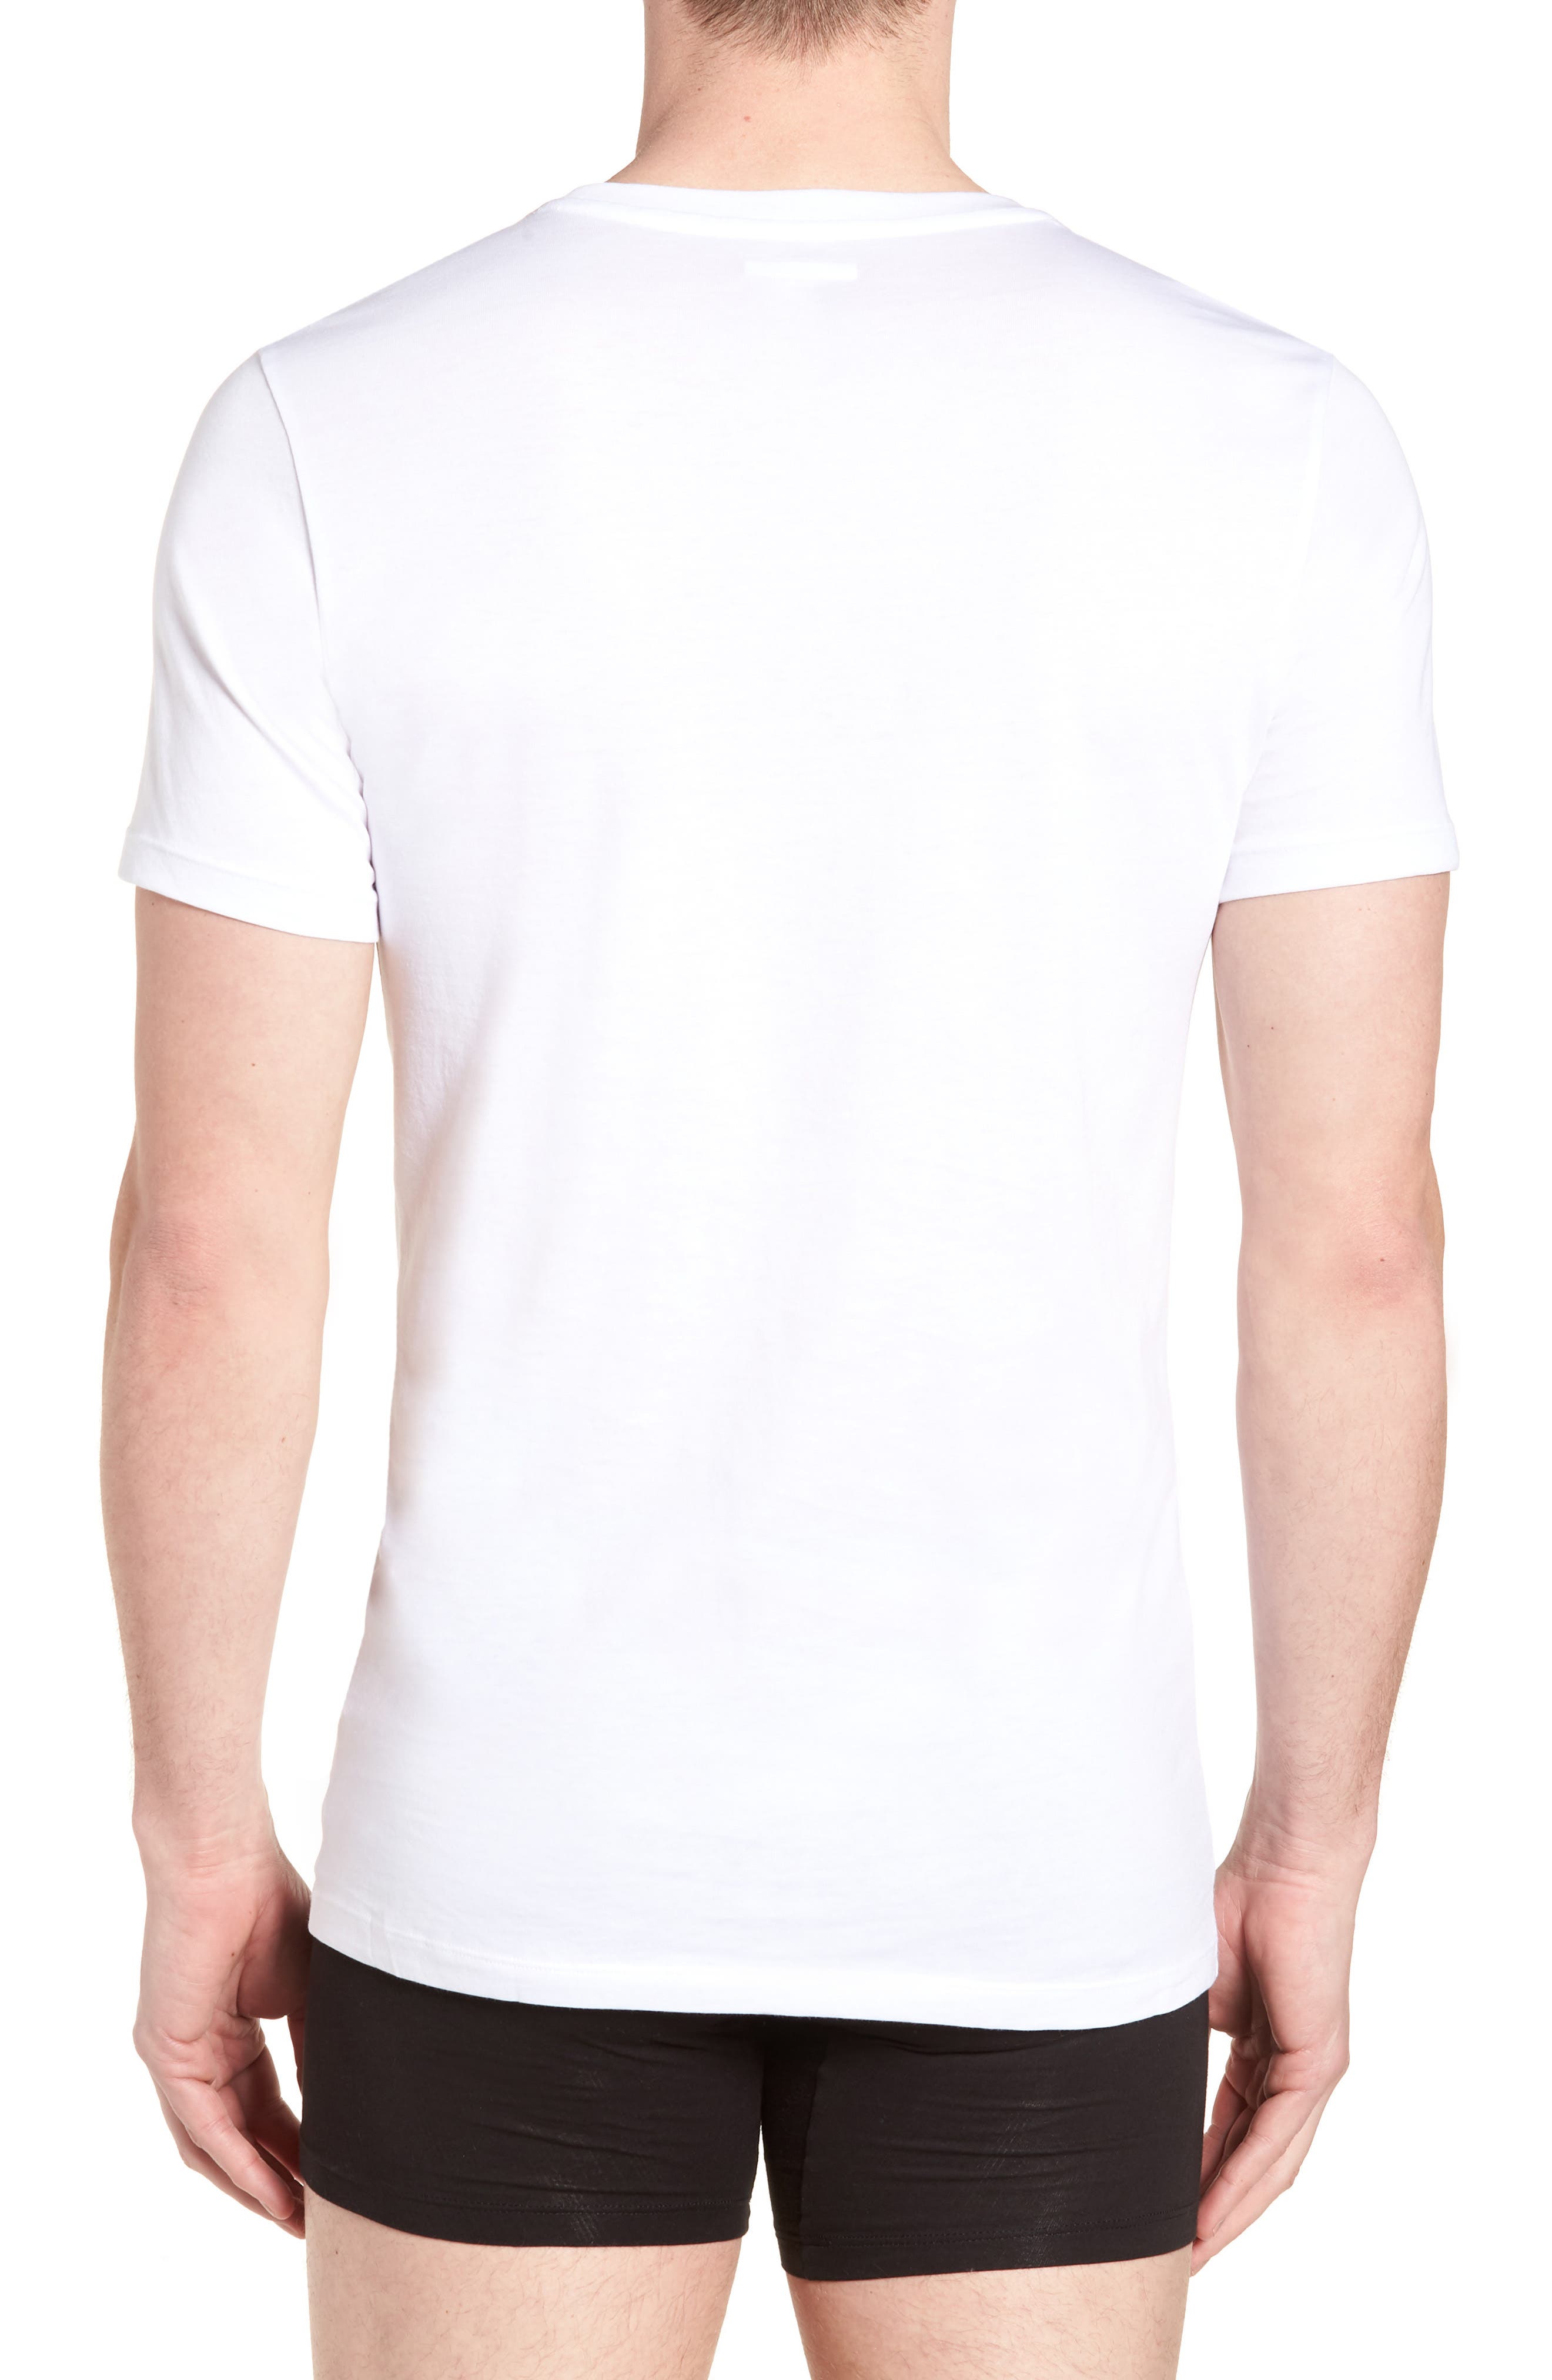 lacoste white t shirt 3 pack